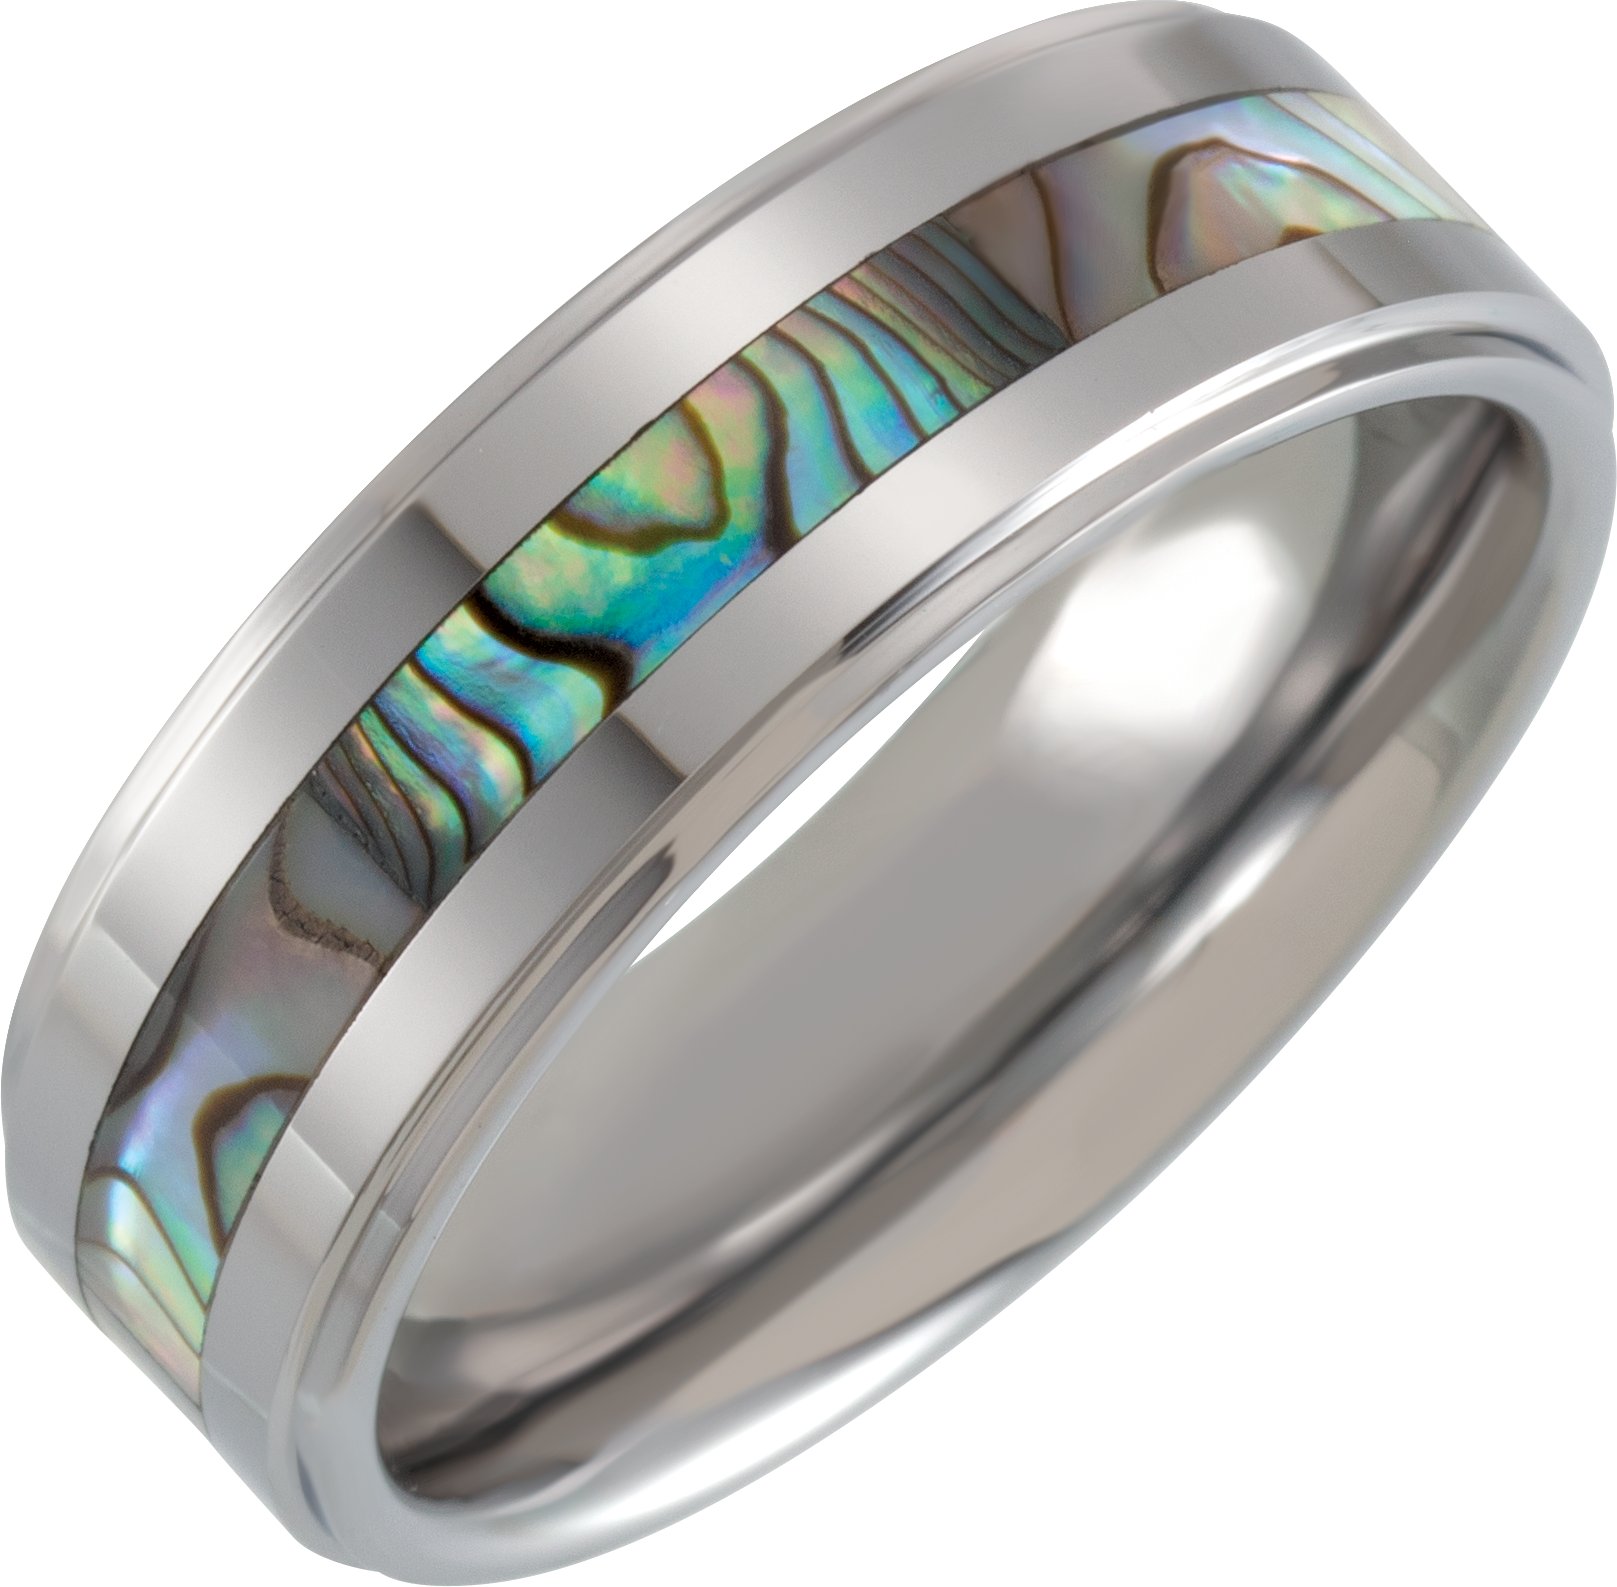 Tungsten 8 mm Flat Stepped Band with Mother of Pearl Inlay Size 9